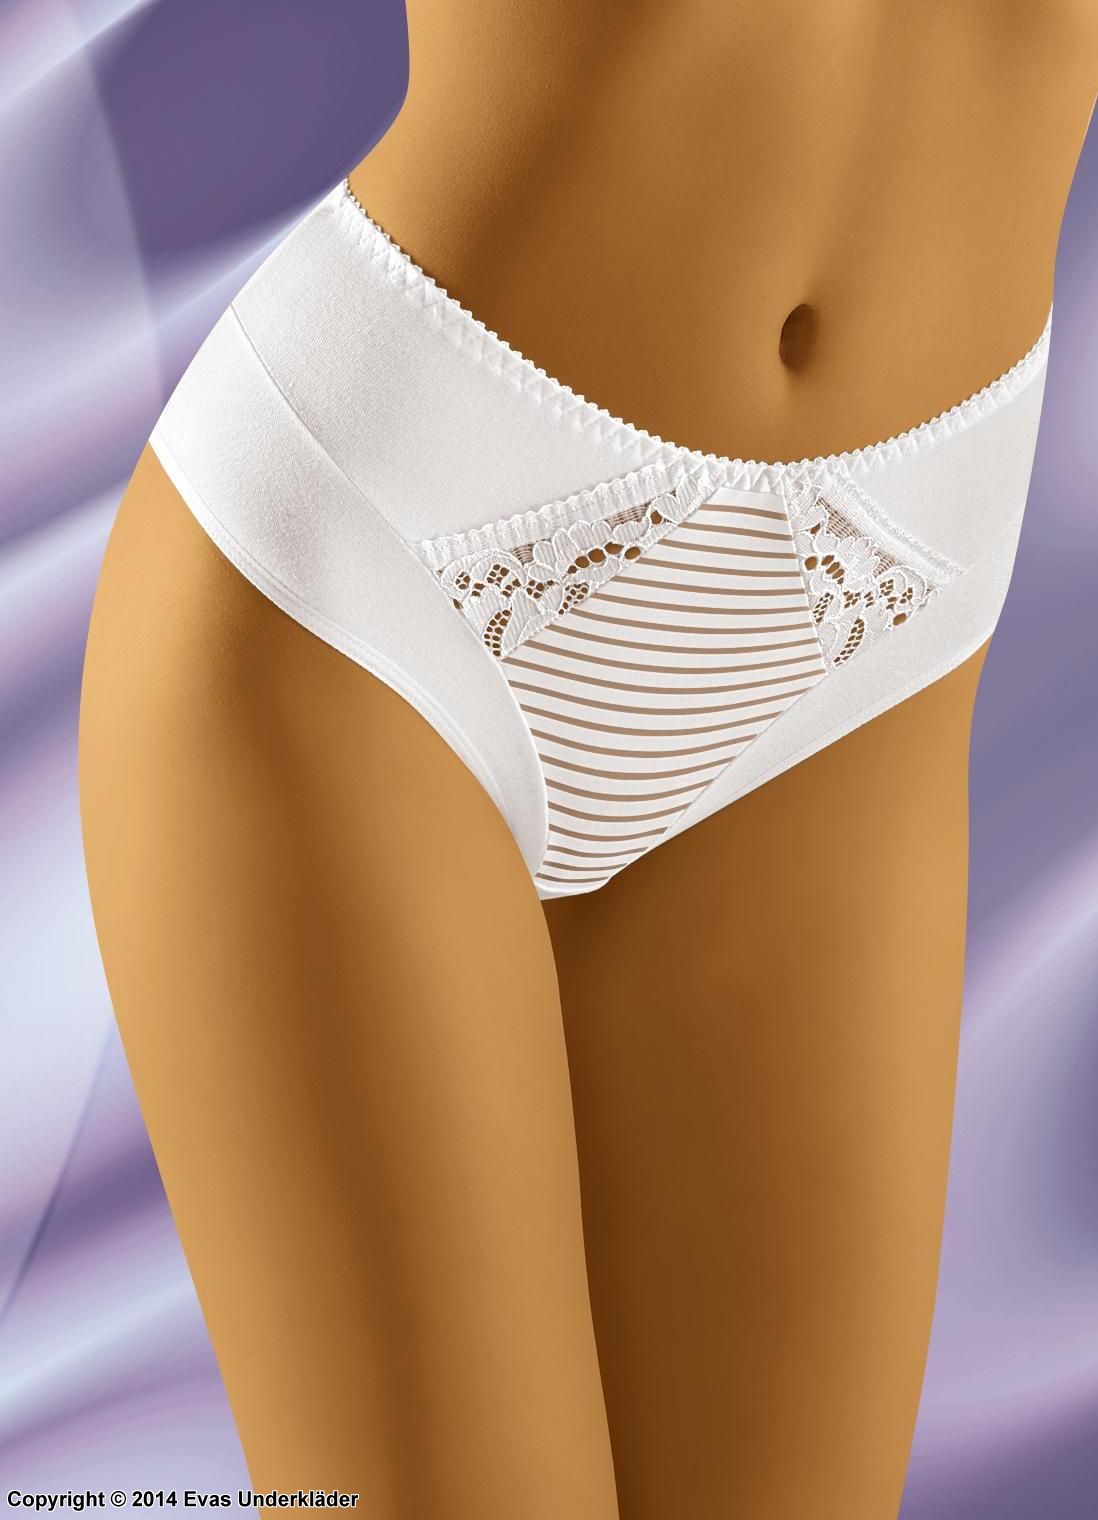 Classic briefs, high quality cotton, lace inlays, stripes